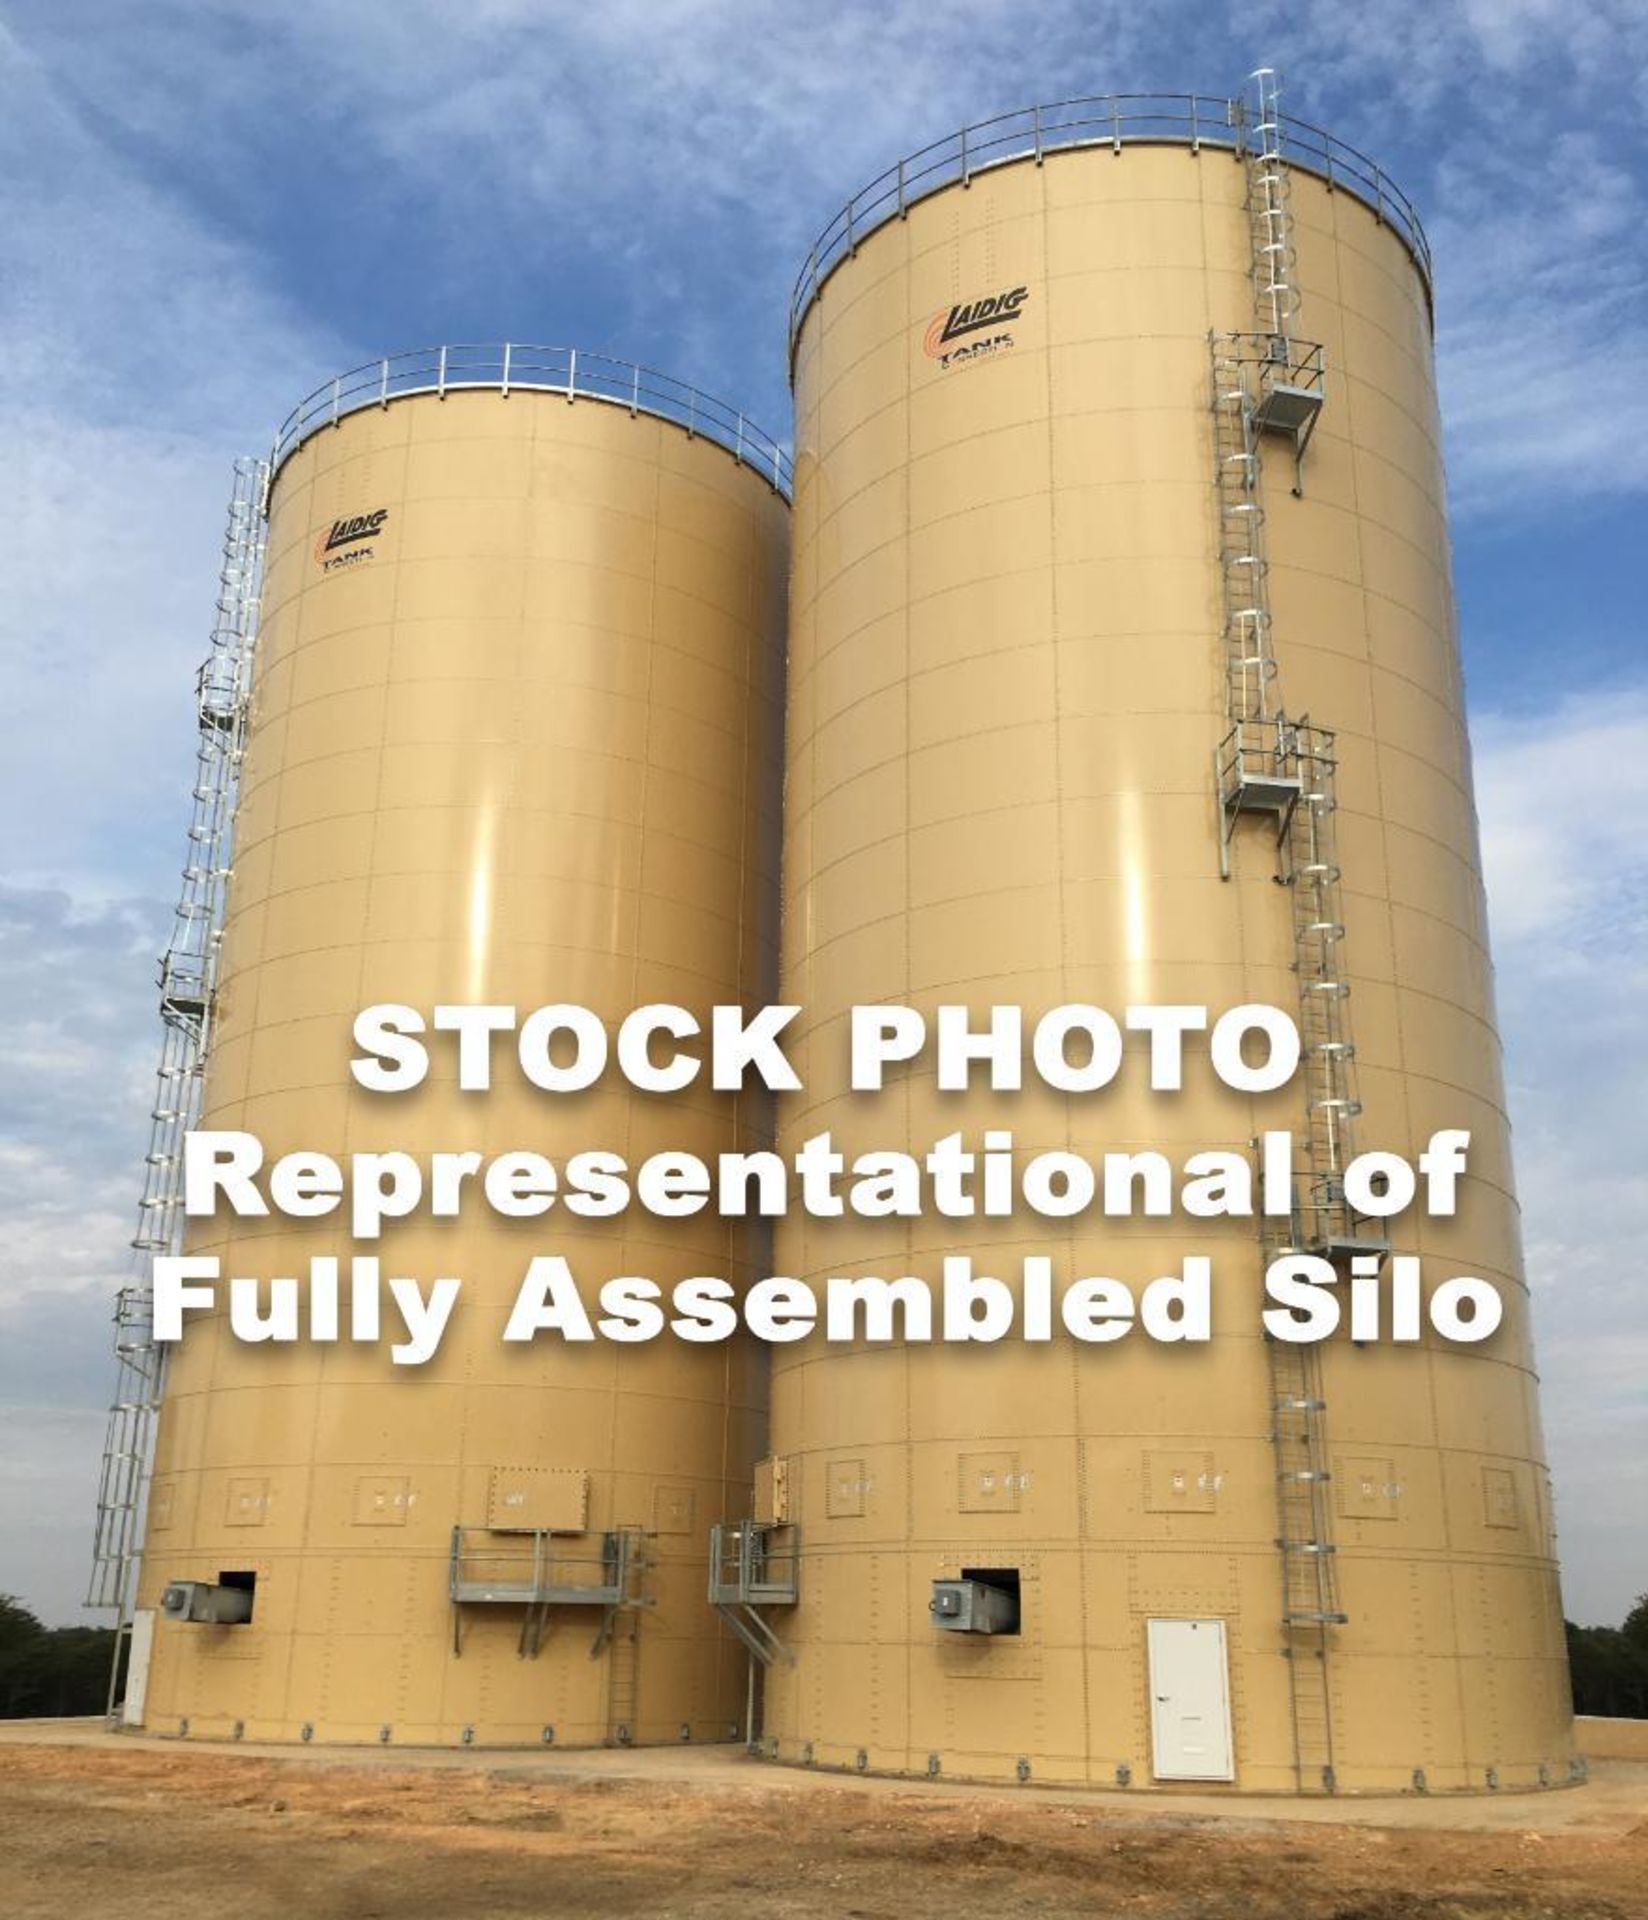 46.16' x 69.02', Steel Bolted Silo, Never Erected-On ground, Appox. 69,670 cu ft, 115 mph wind condi